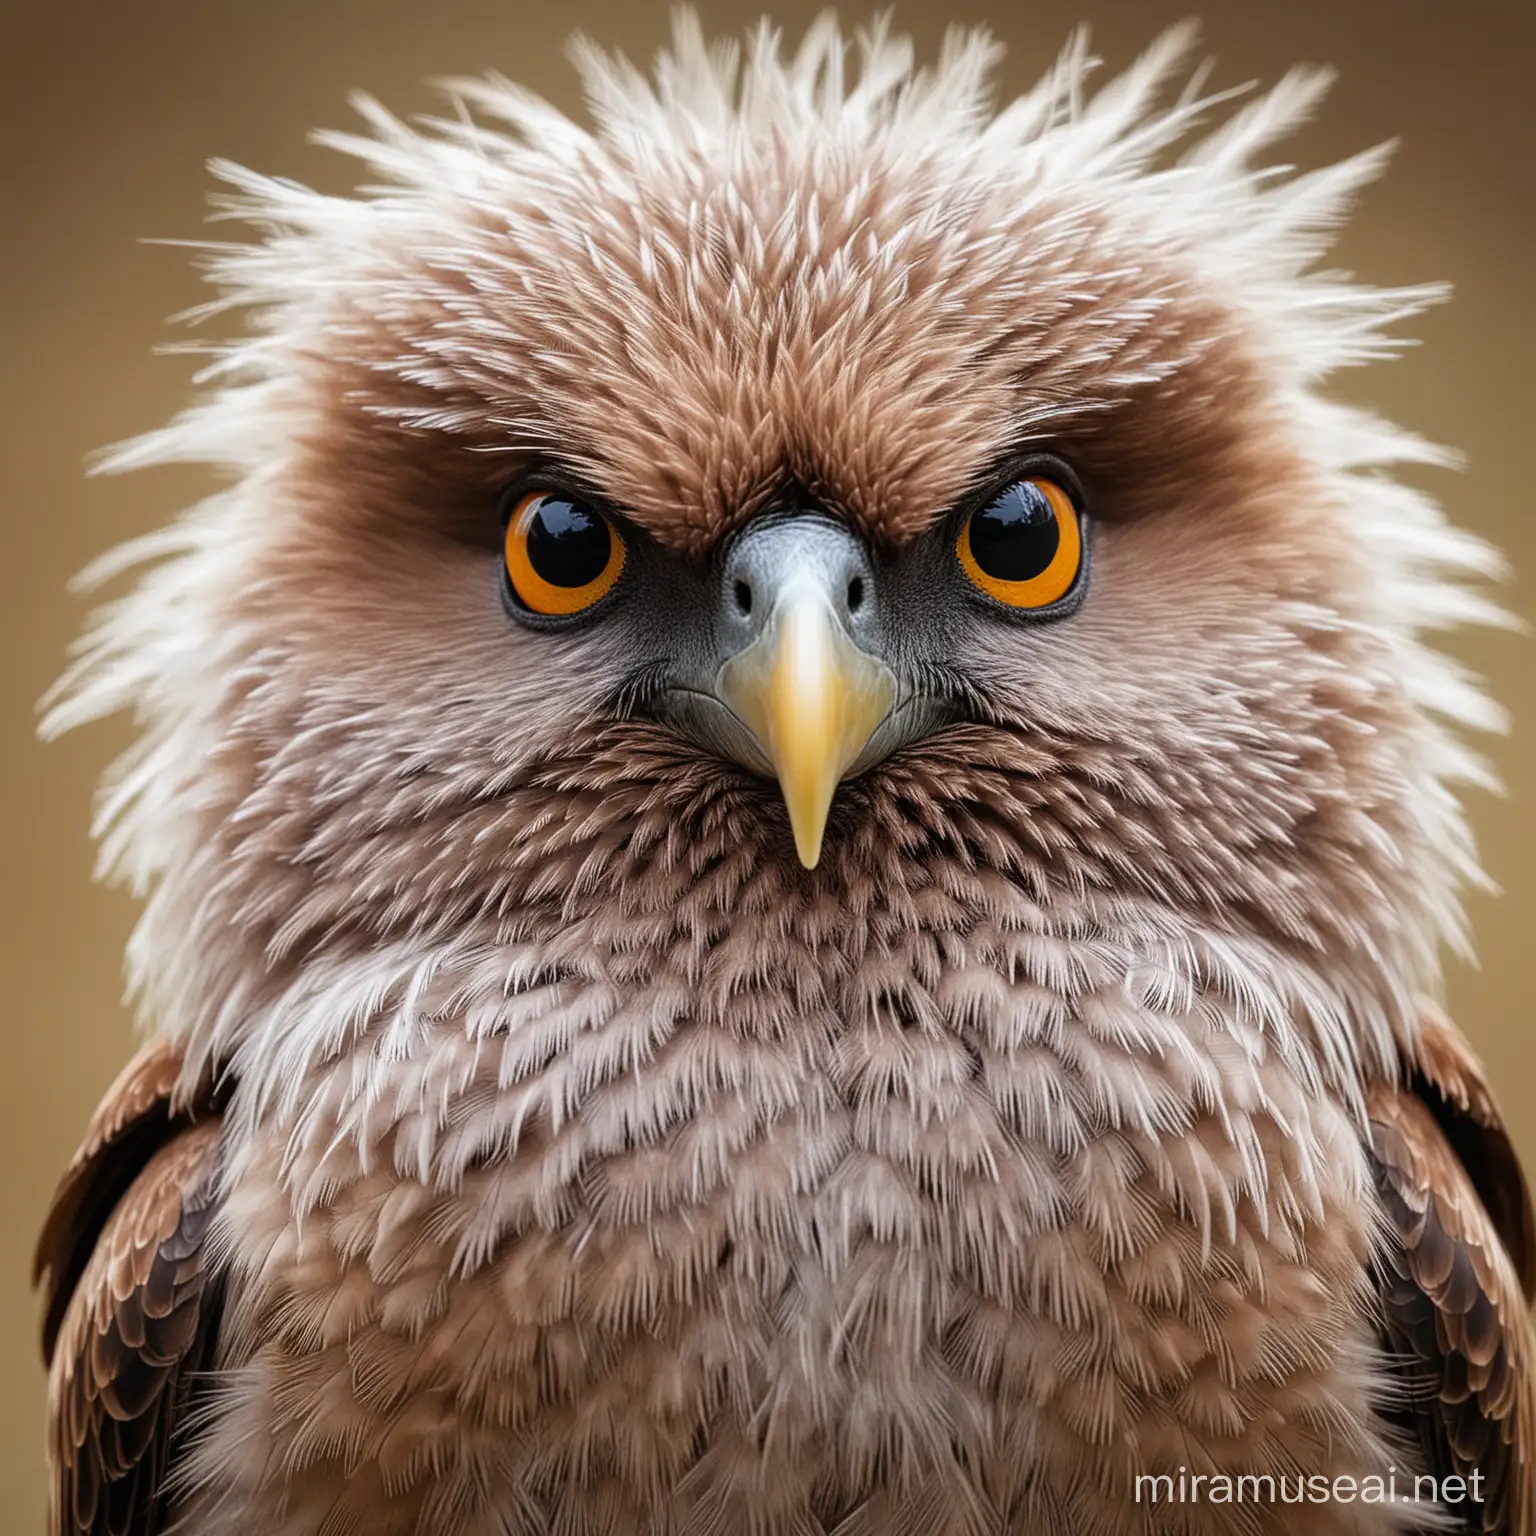 A beautiful feathered bird looking straight into the camera